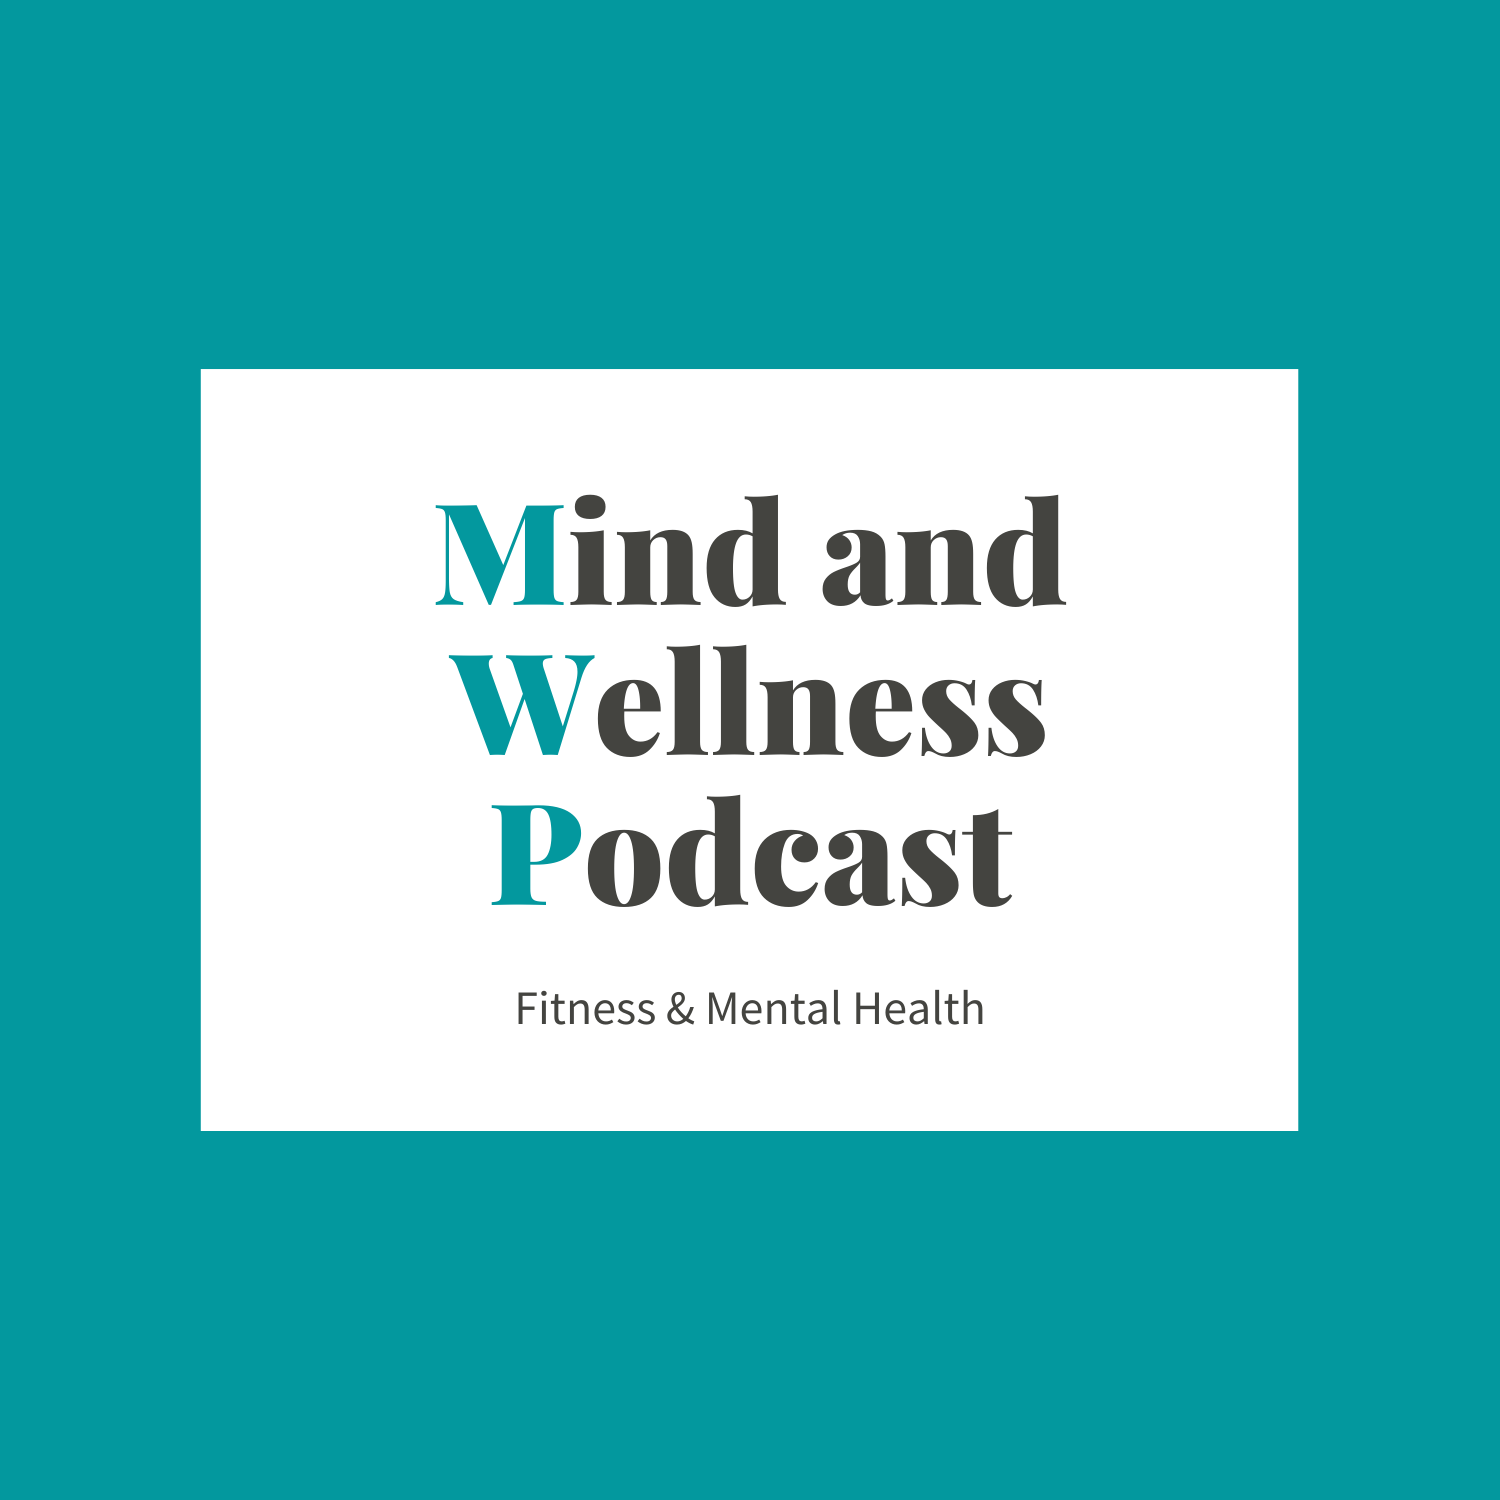 The Mind and Wellness Podcast